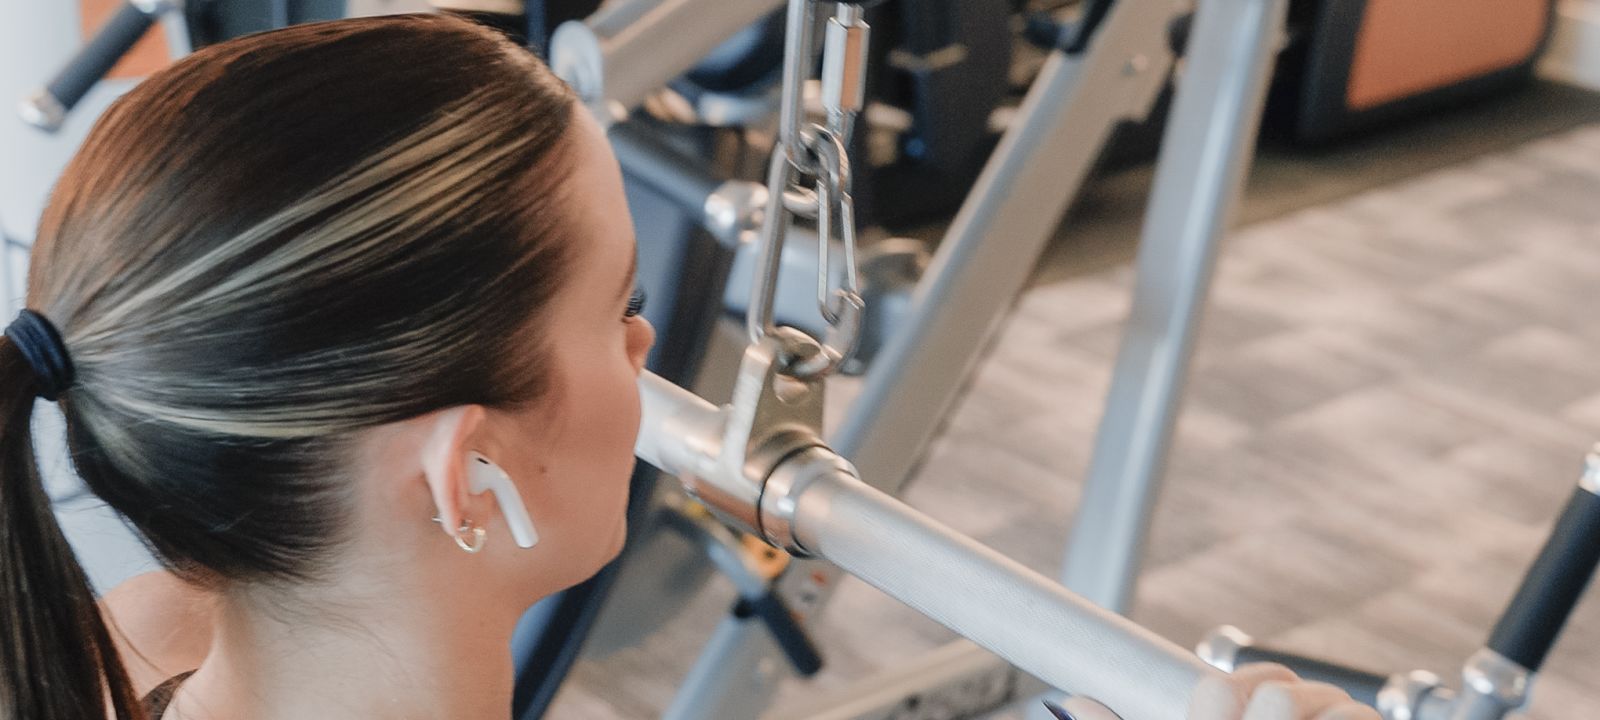 A Woman Working Out In A Gym